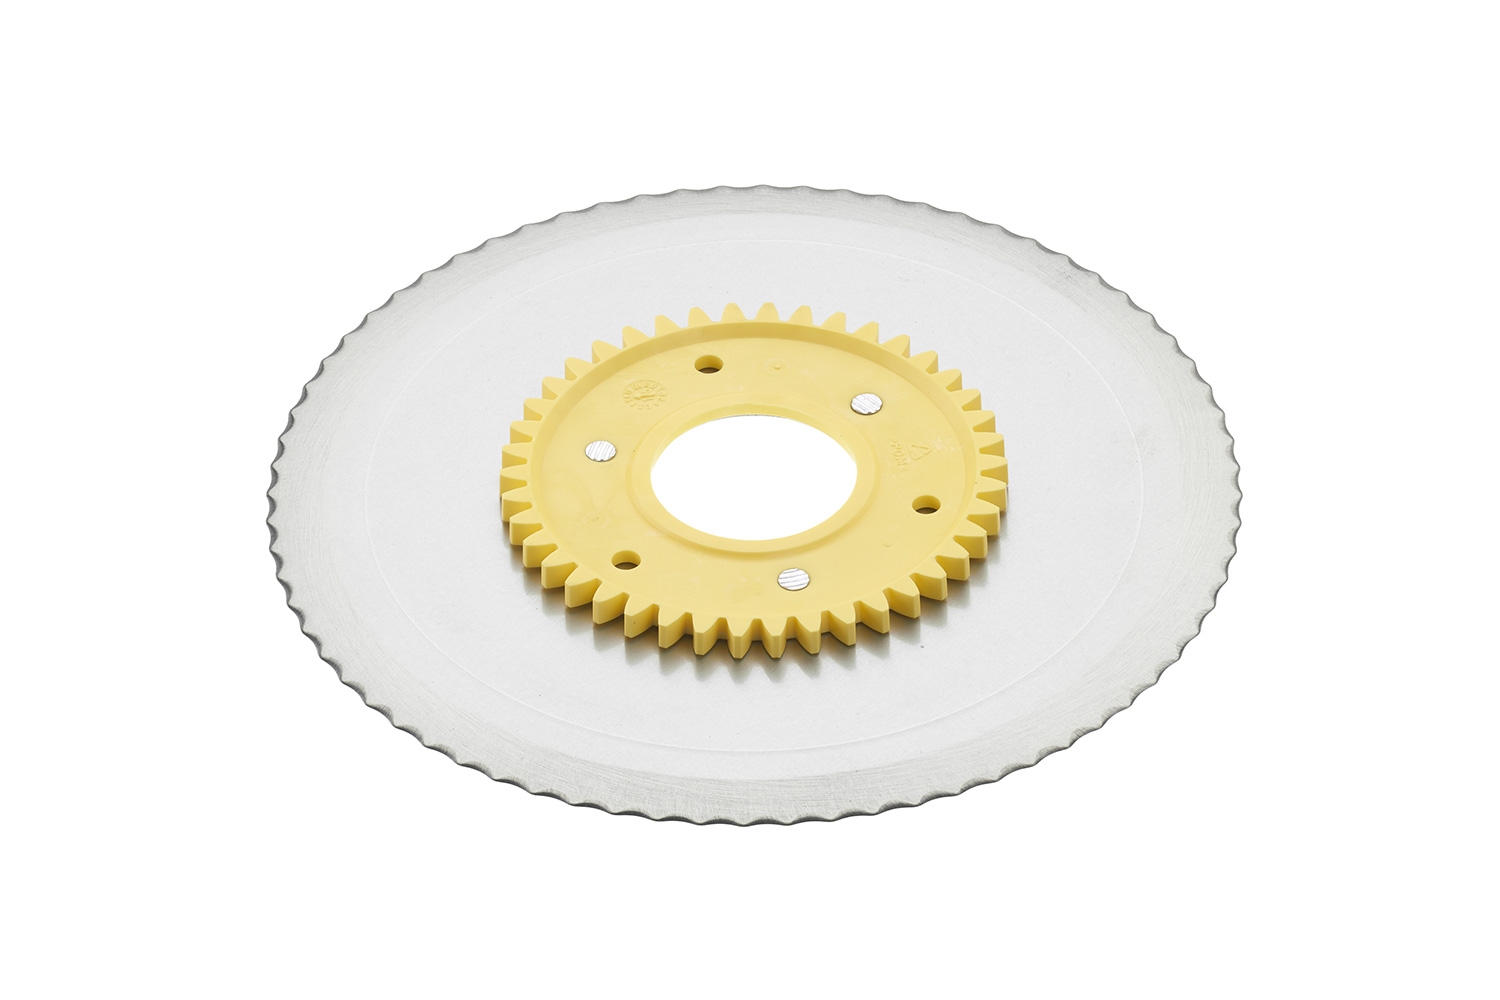 Standard serrated circular blade with a yellow gear